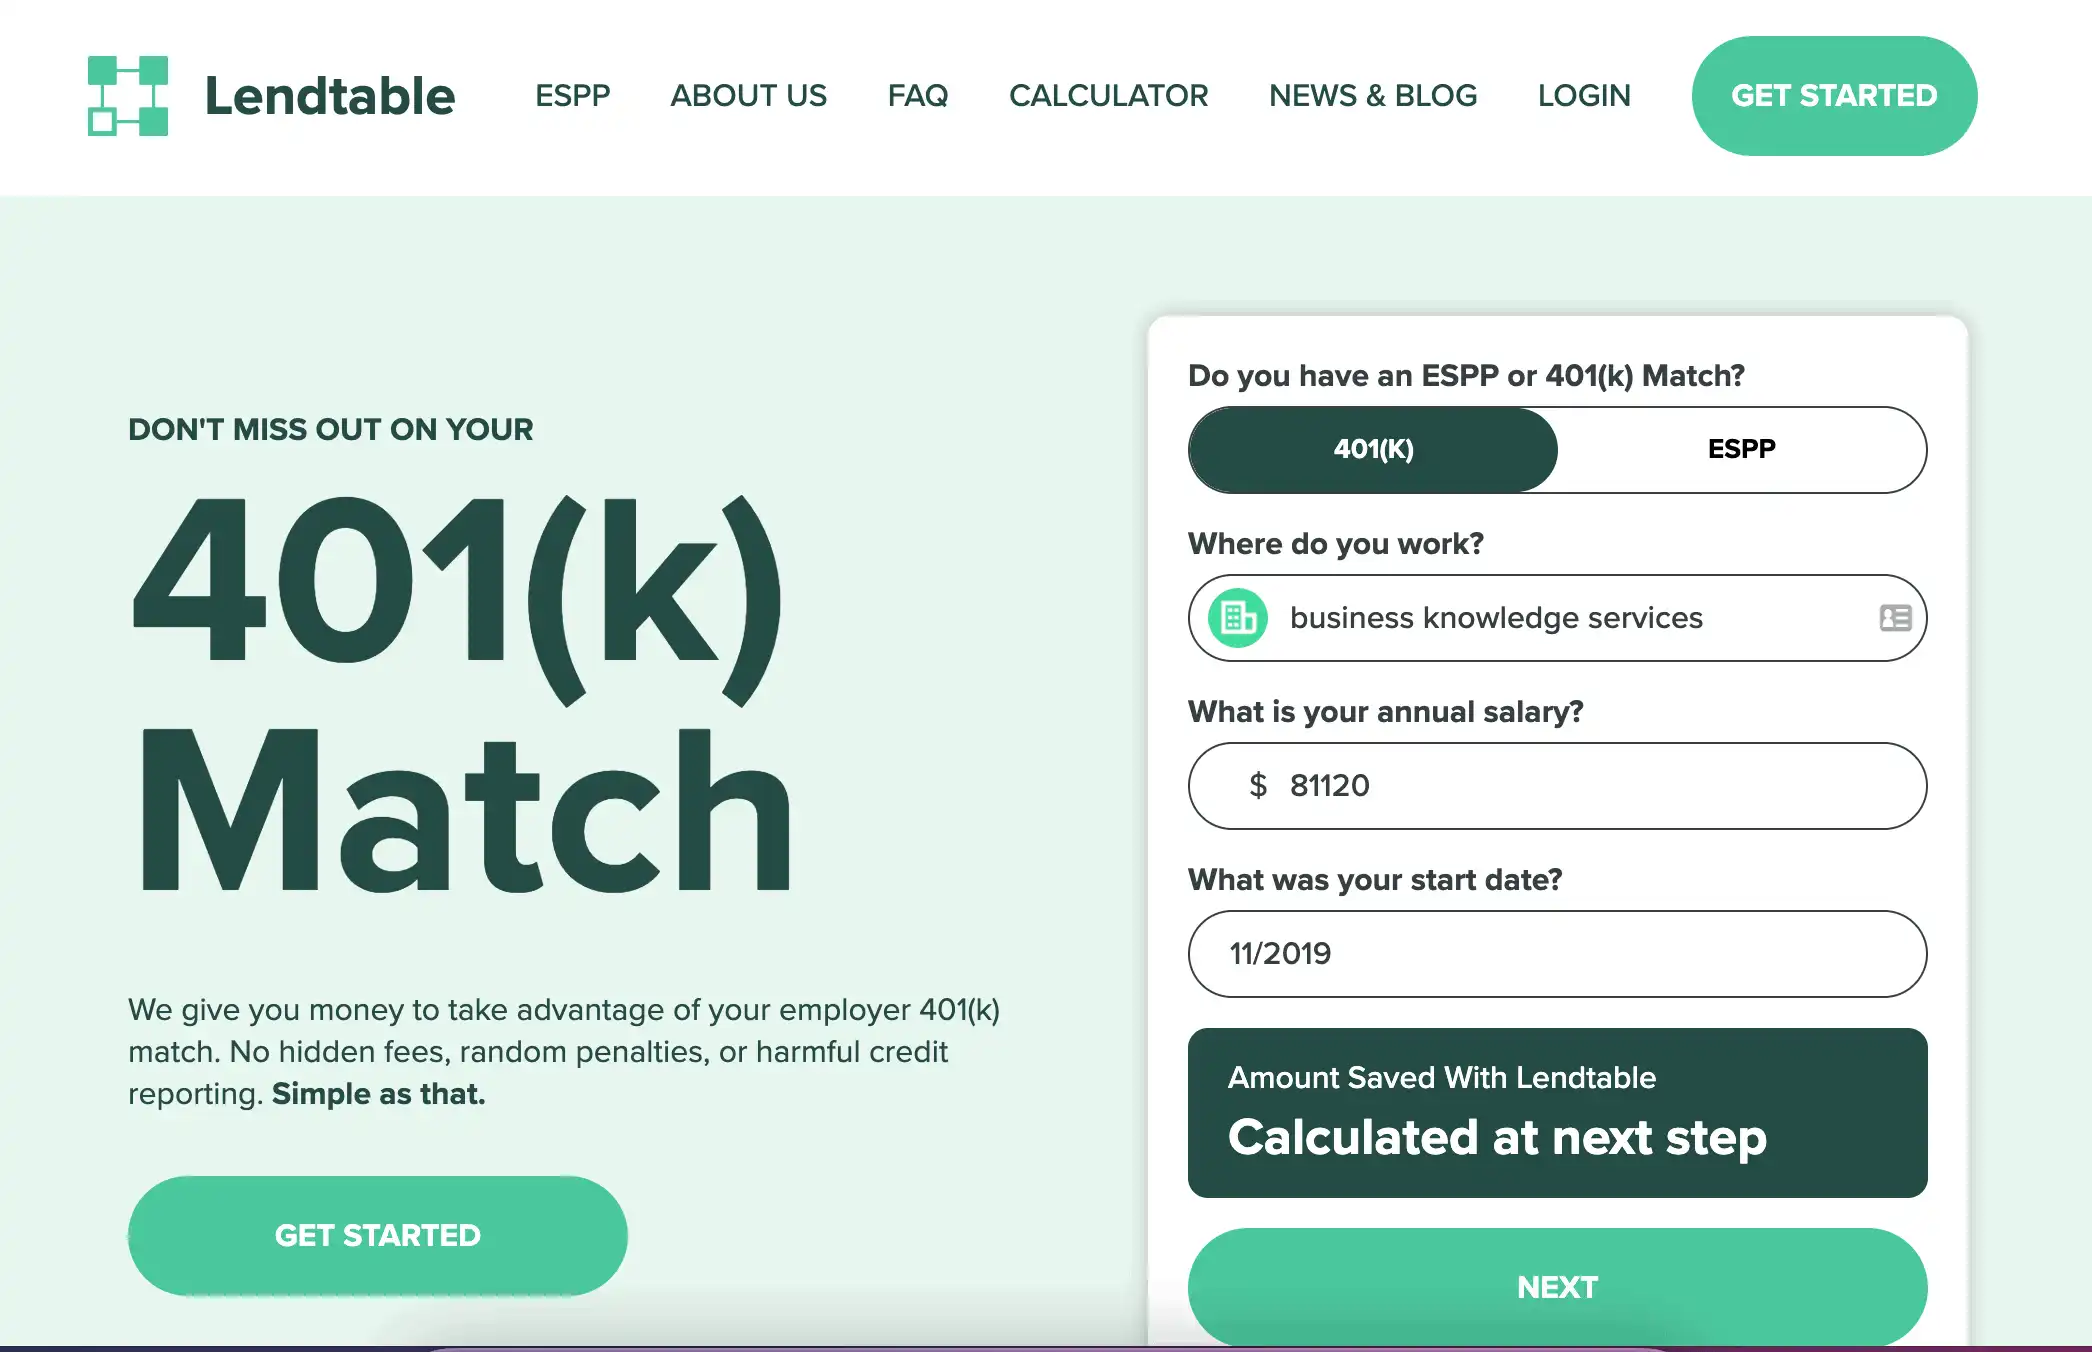 Lendtable | Dont miss out on your 401(k) match